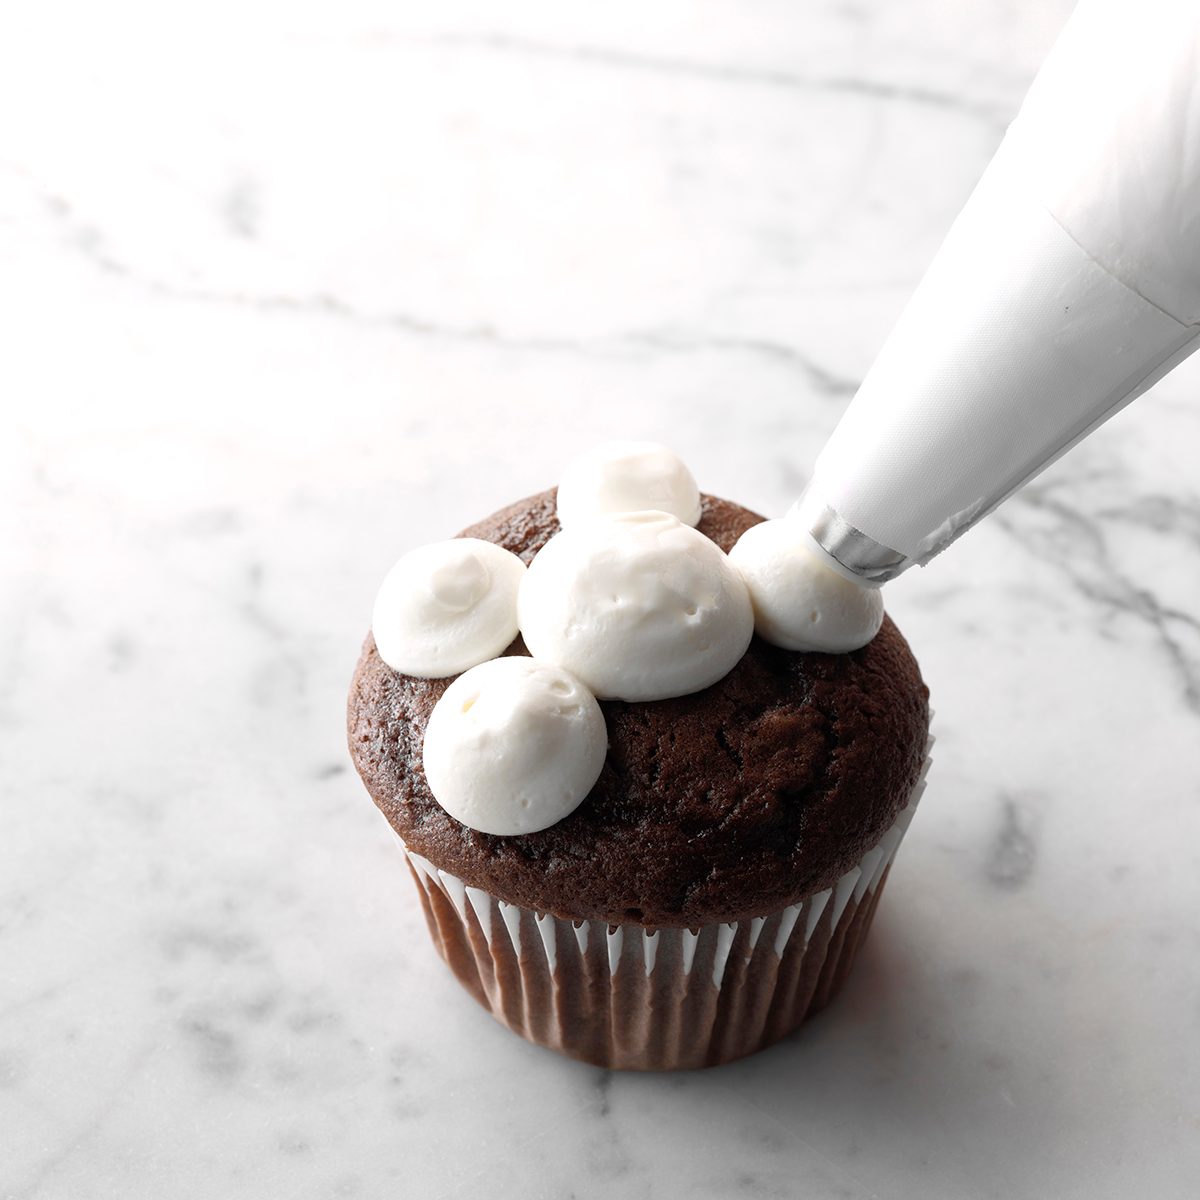 11 Easy Cupcake Decorating Ideas | Taste of Home